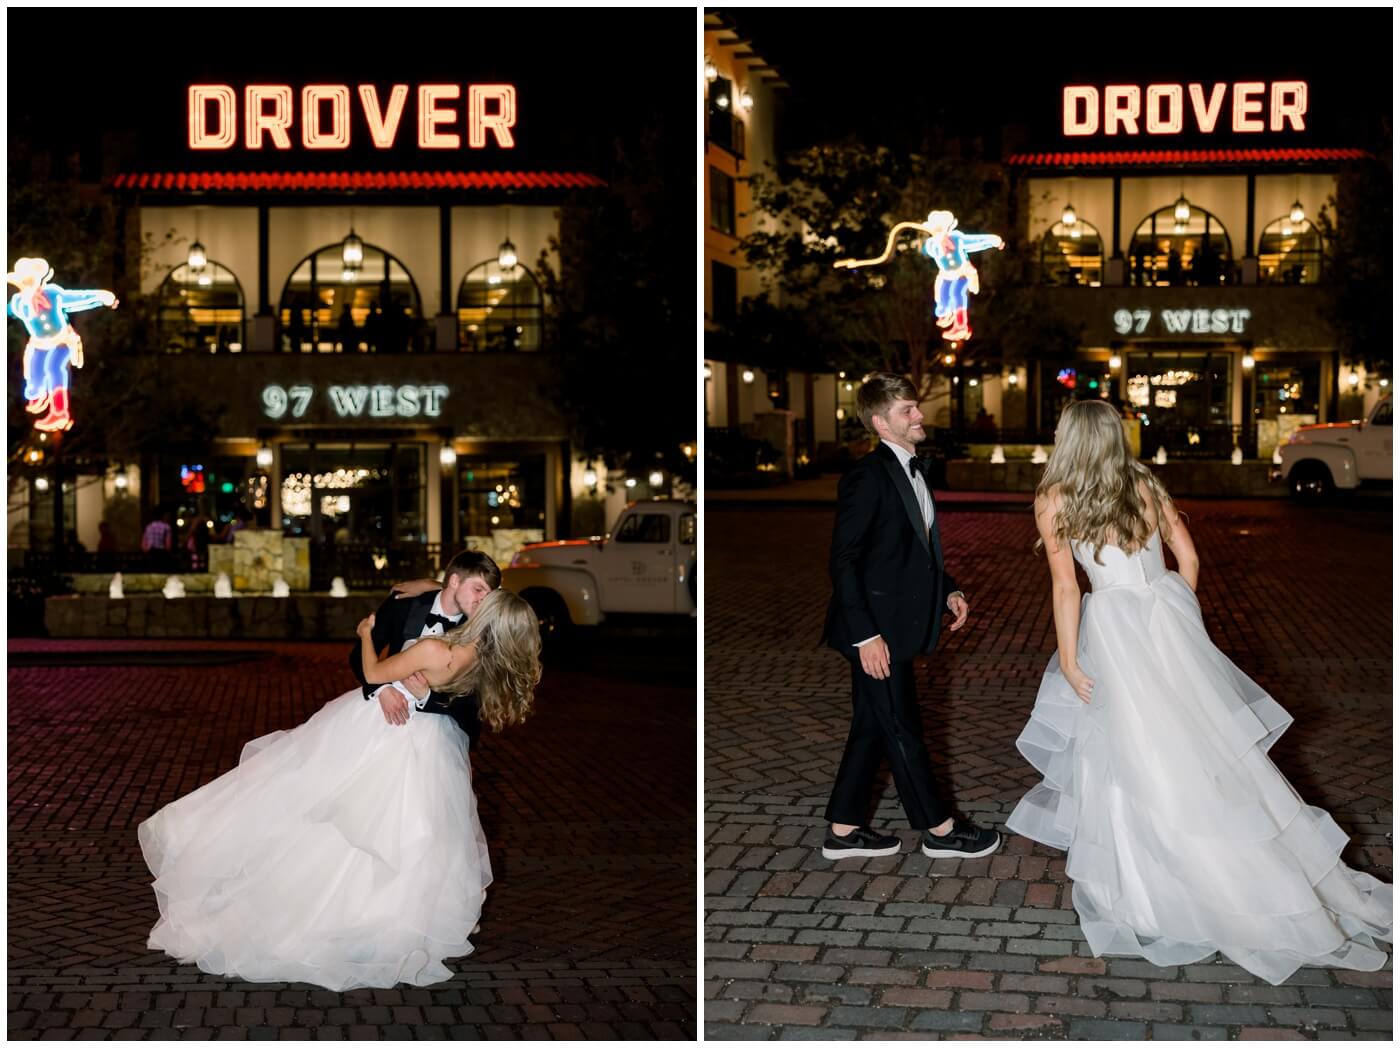 The bride and groom kiss in front of Hotel Drover at night